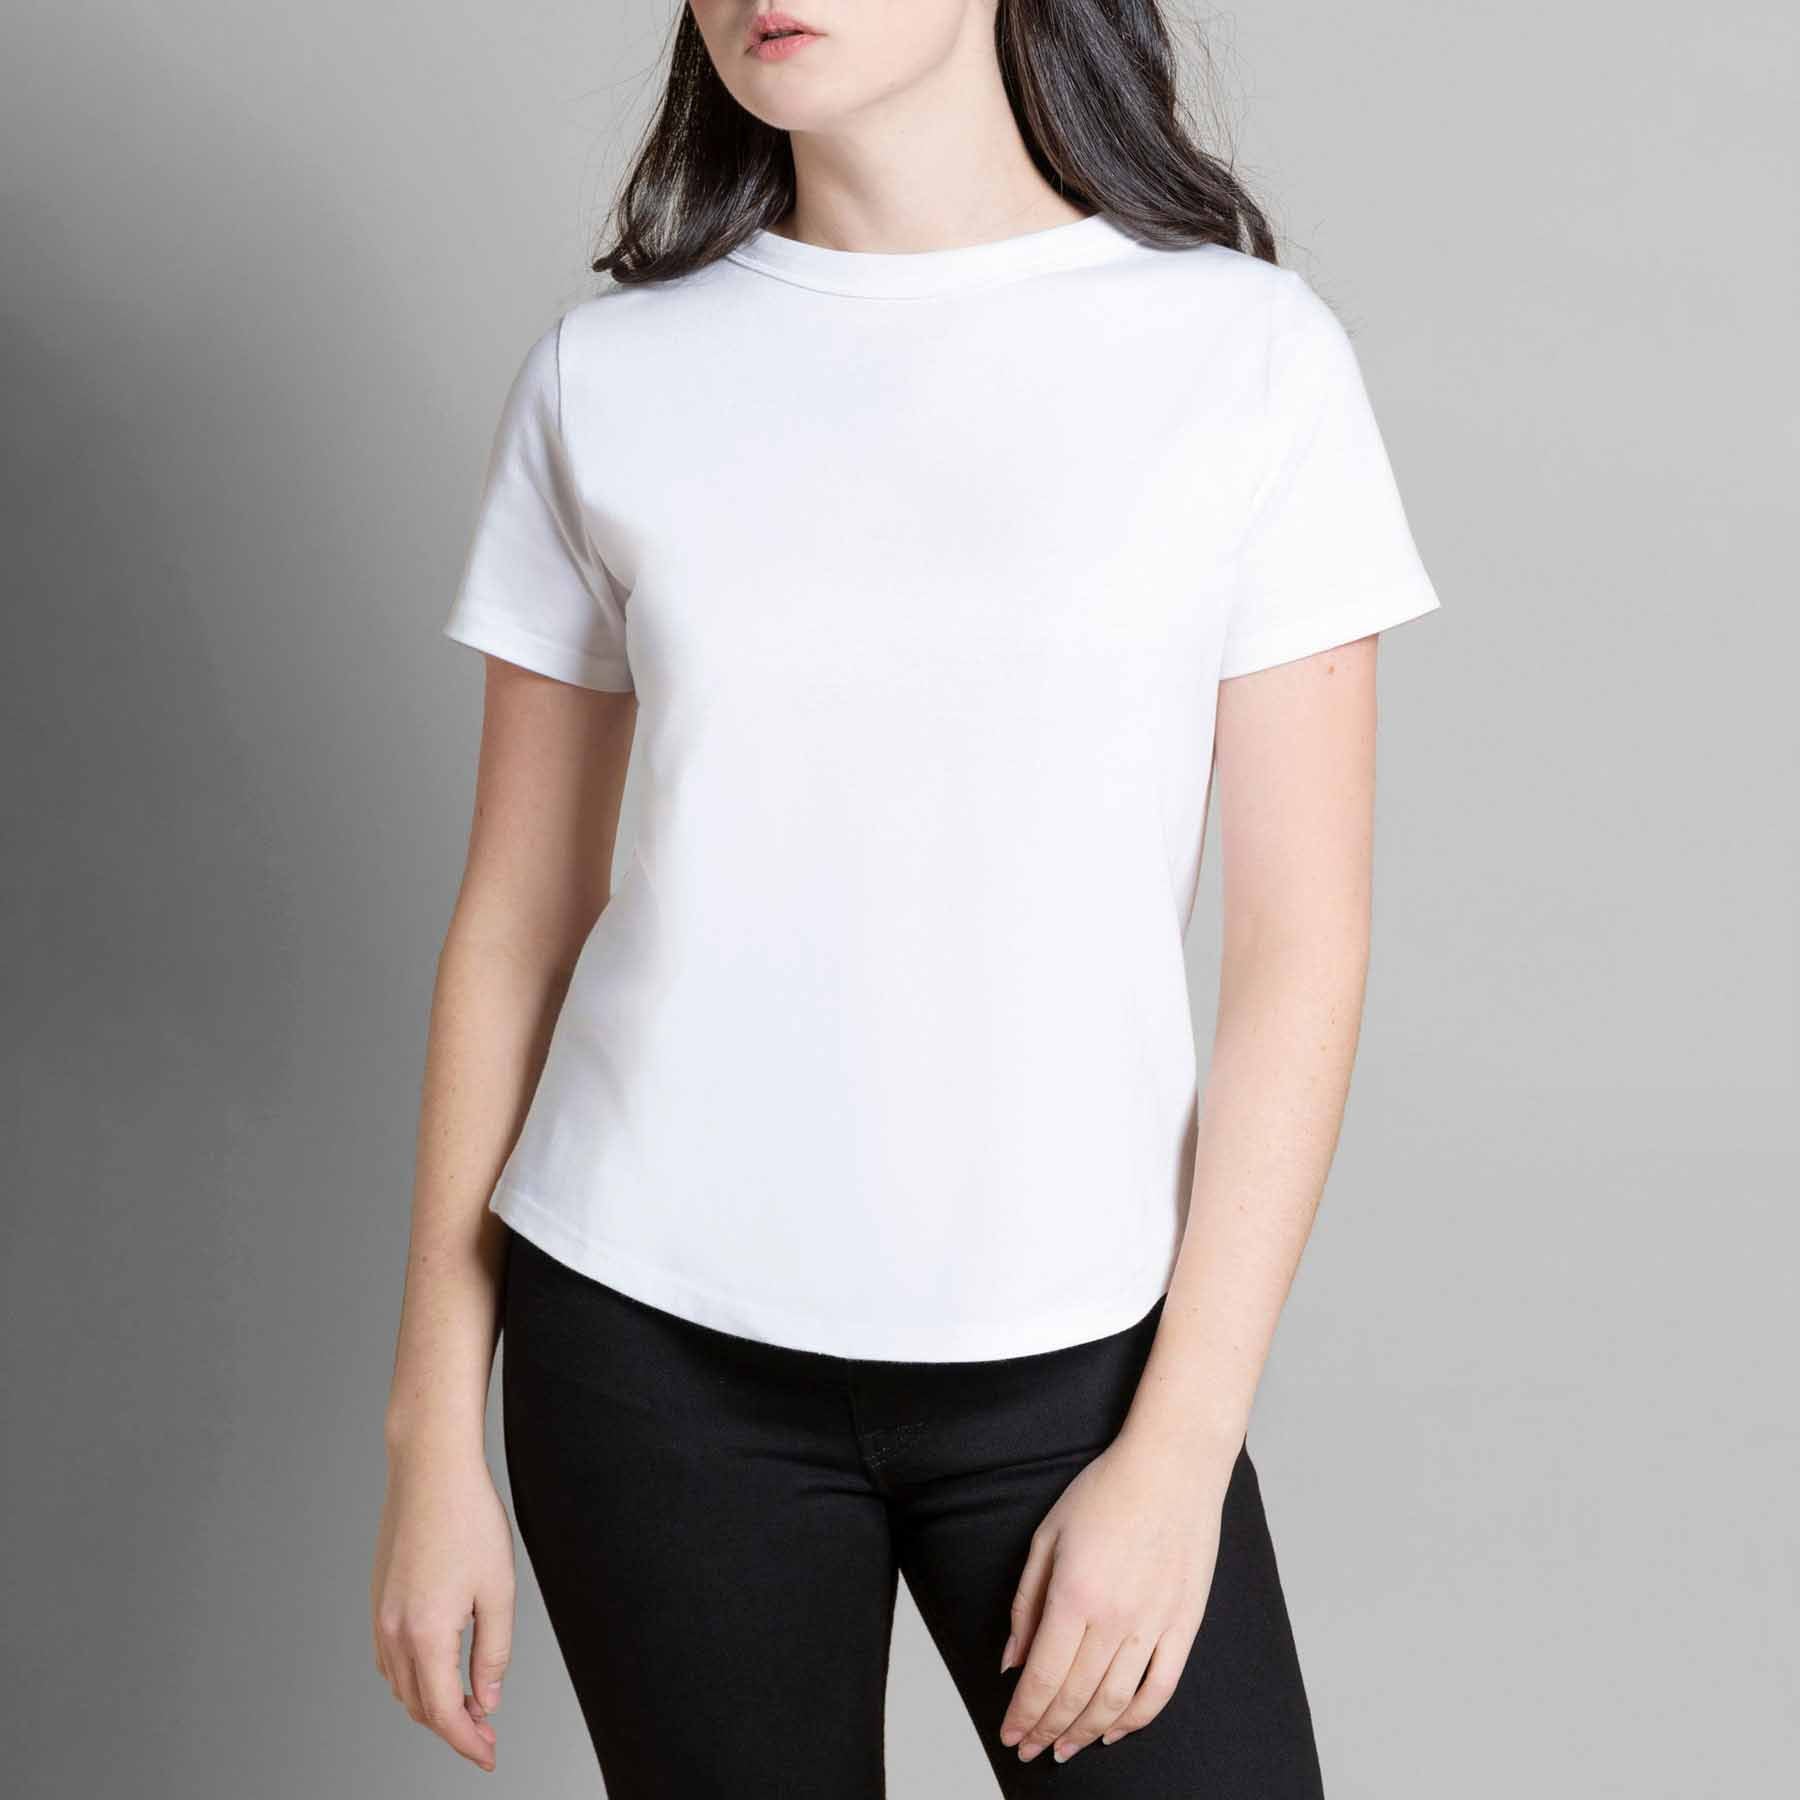 T-shirt blanc femme col rond coton bio - Made in France